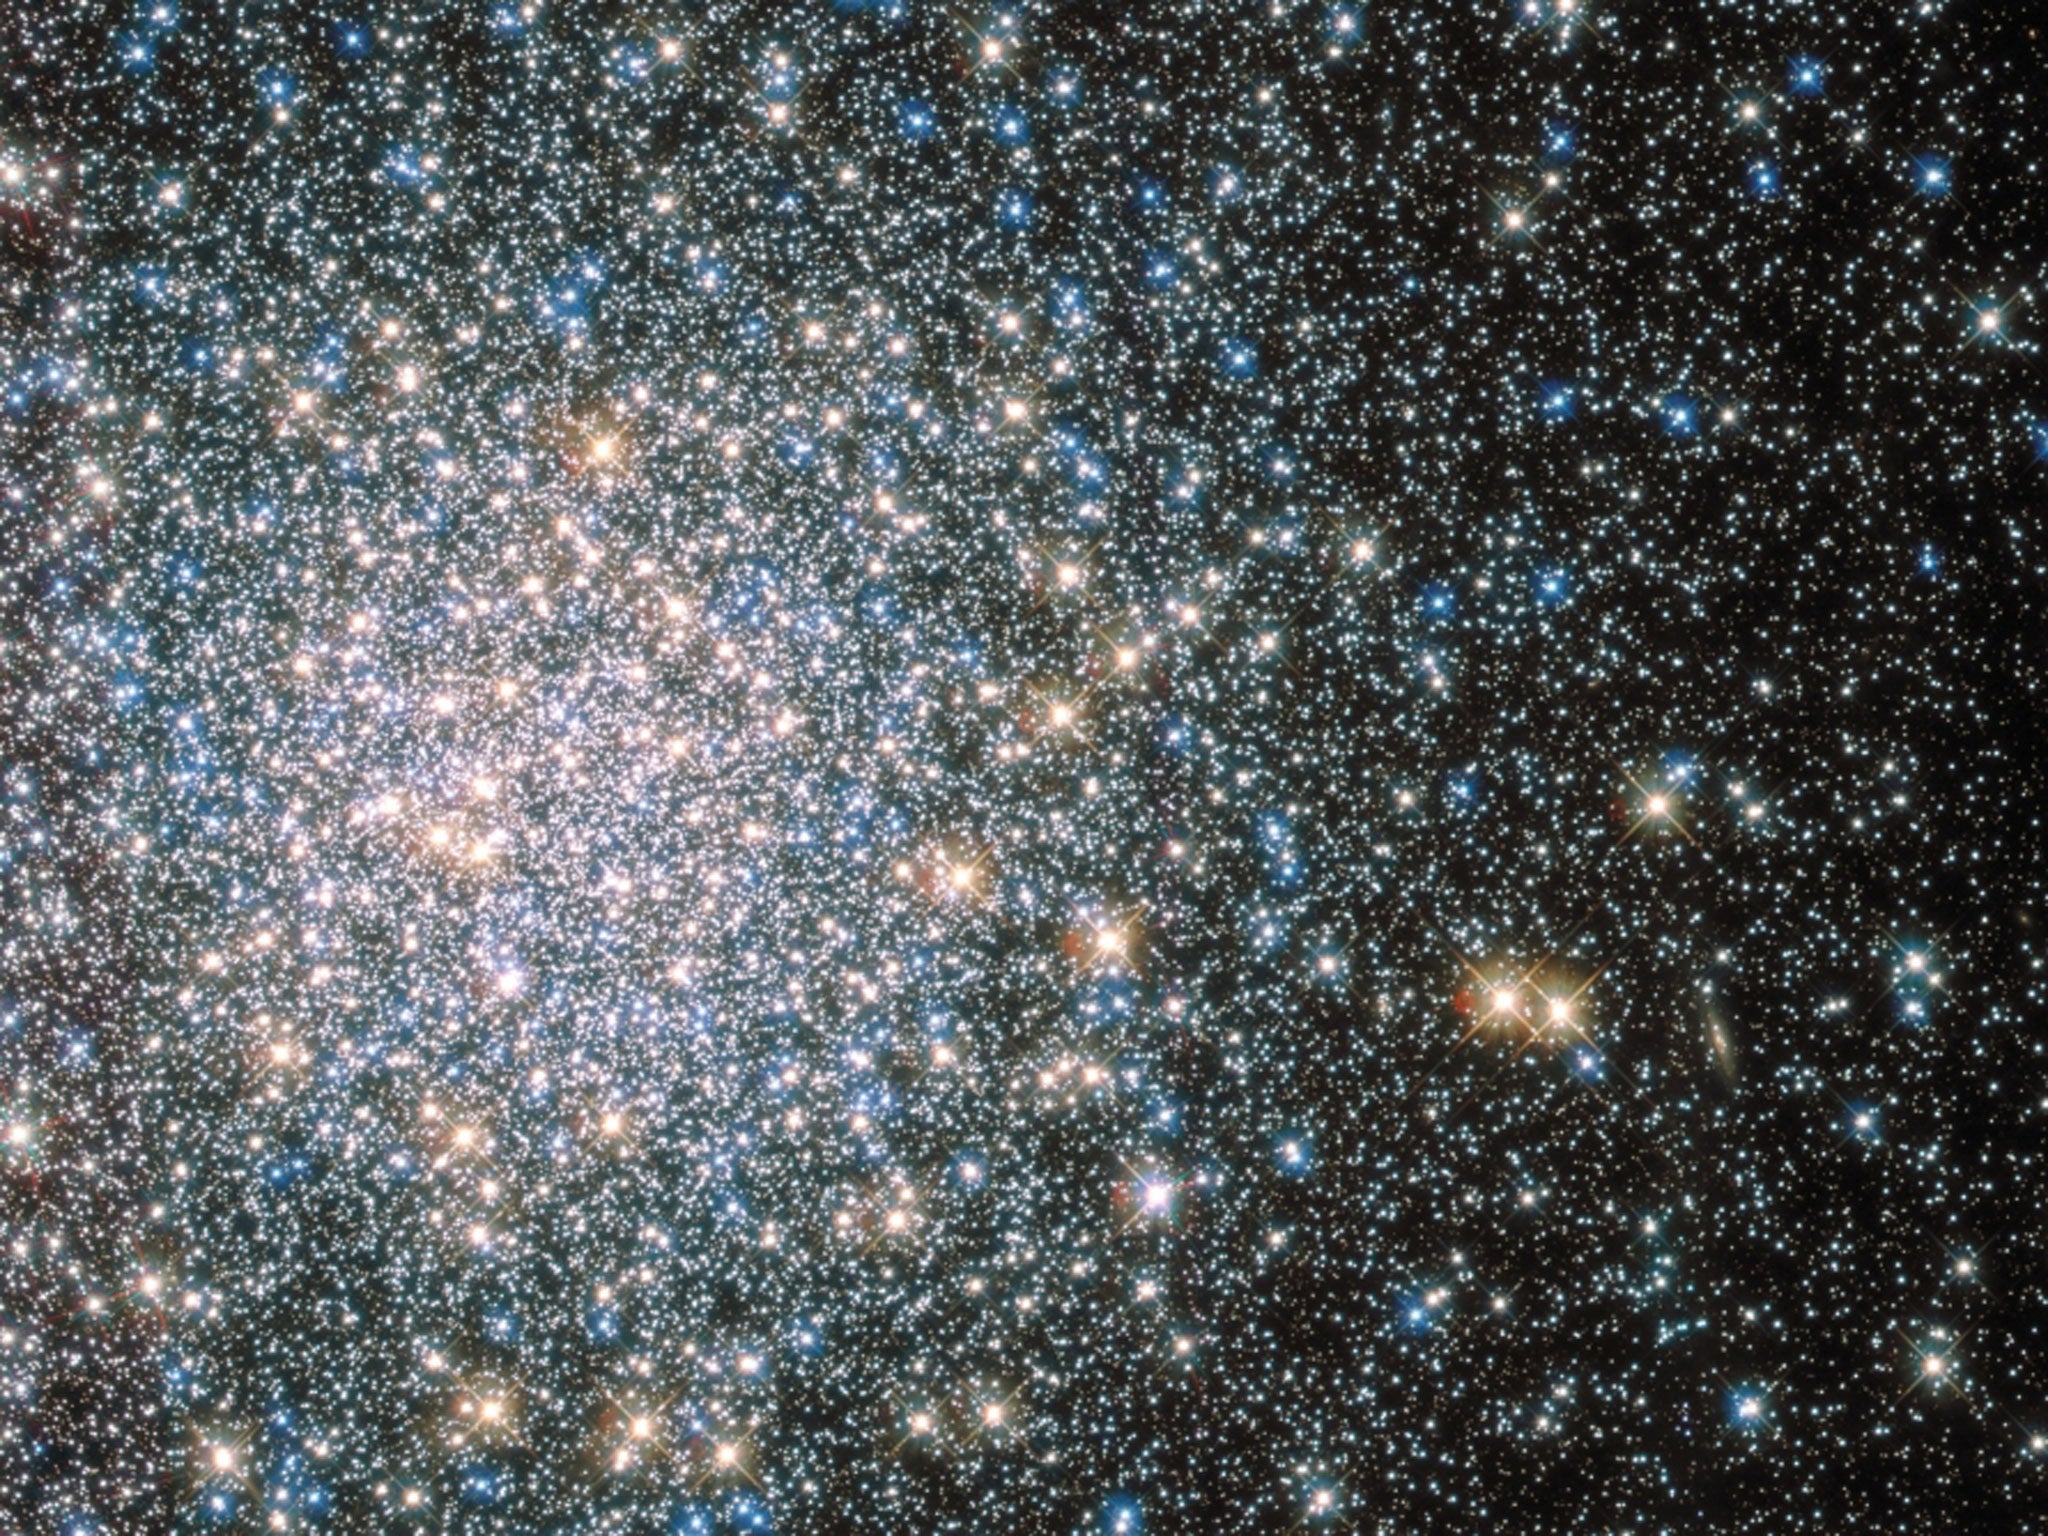 Nasa has released this image from the Hubble Space Telescope of an ancient star cluster